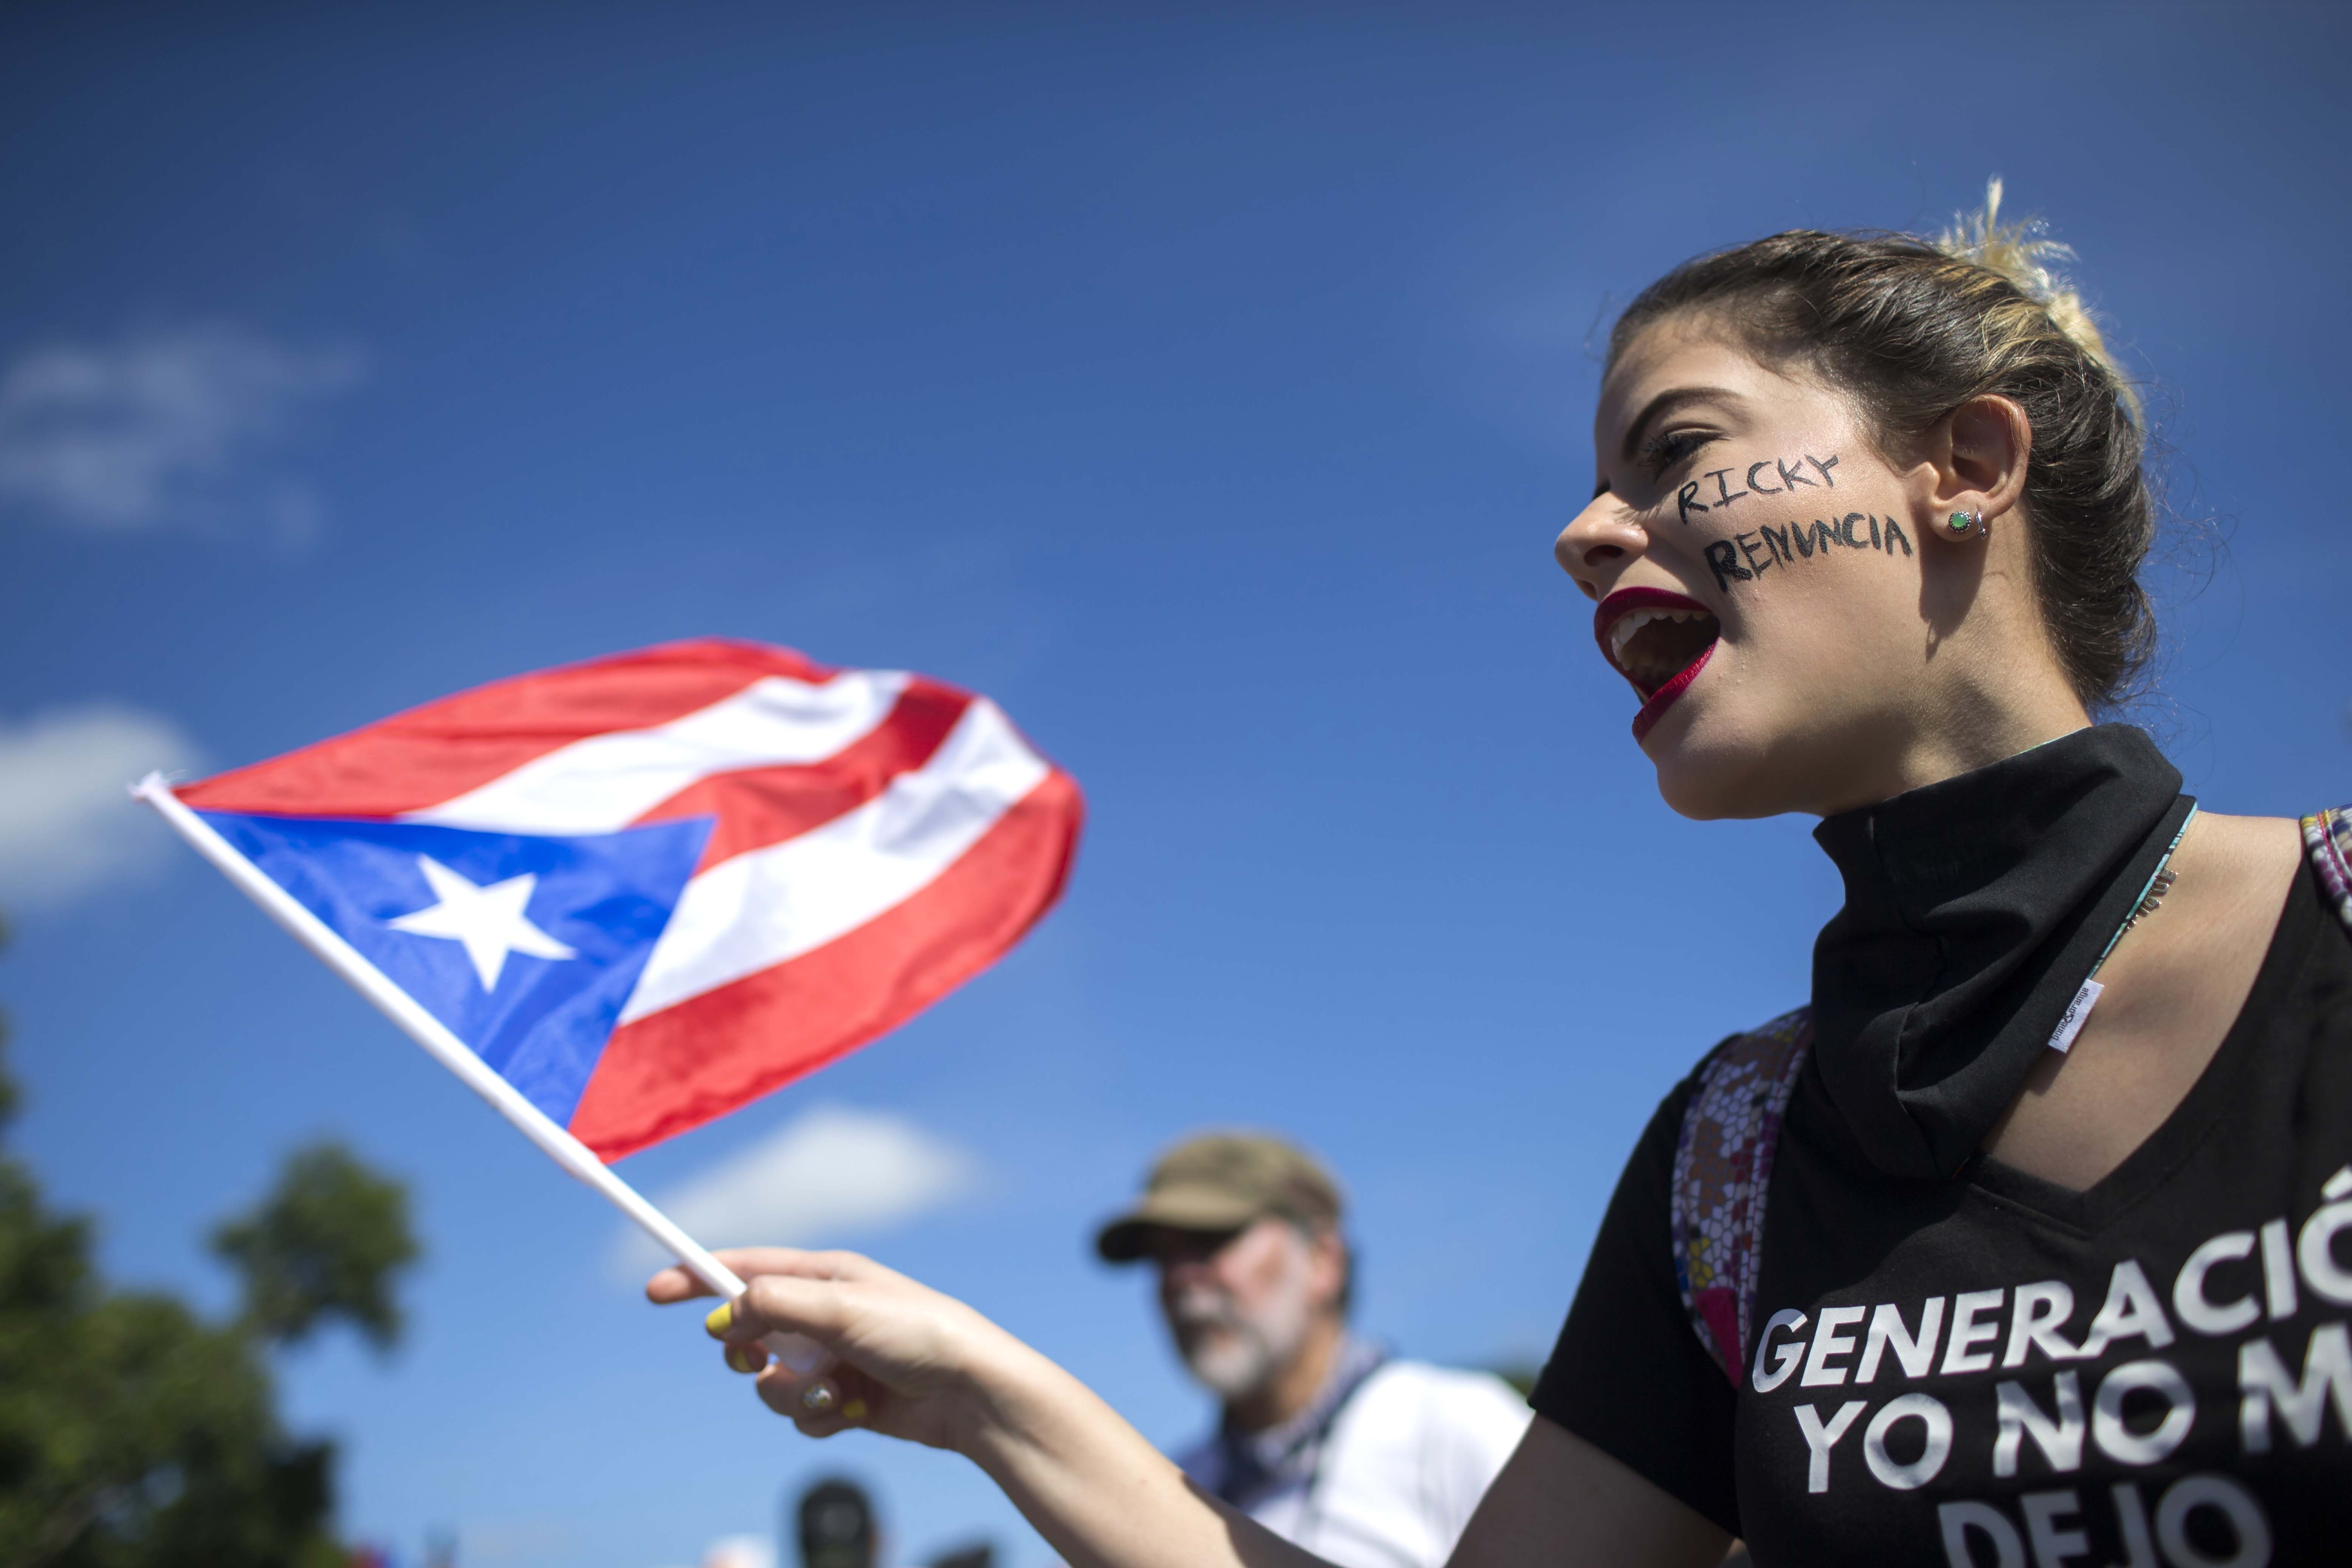 A woman flies a Puerto Rico flag during a protest to demand the resignation of Governor Ricardo Rossello from office, in San Juan, Puerto Rico, Monday, July 22, 2019. Protesters are demanding Rossello step down for his involvement in a private chat in which he used profanities to describe an ex-New York City councilwoman and a federal control board overseeing the island's finance. (AP Photo/Dennis M. Rivera Pichardo)